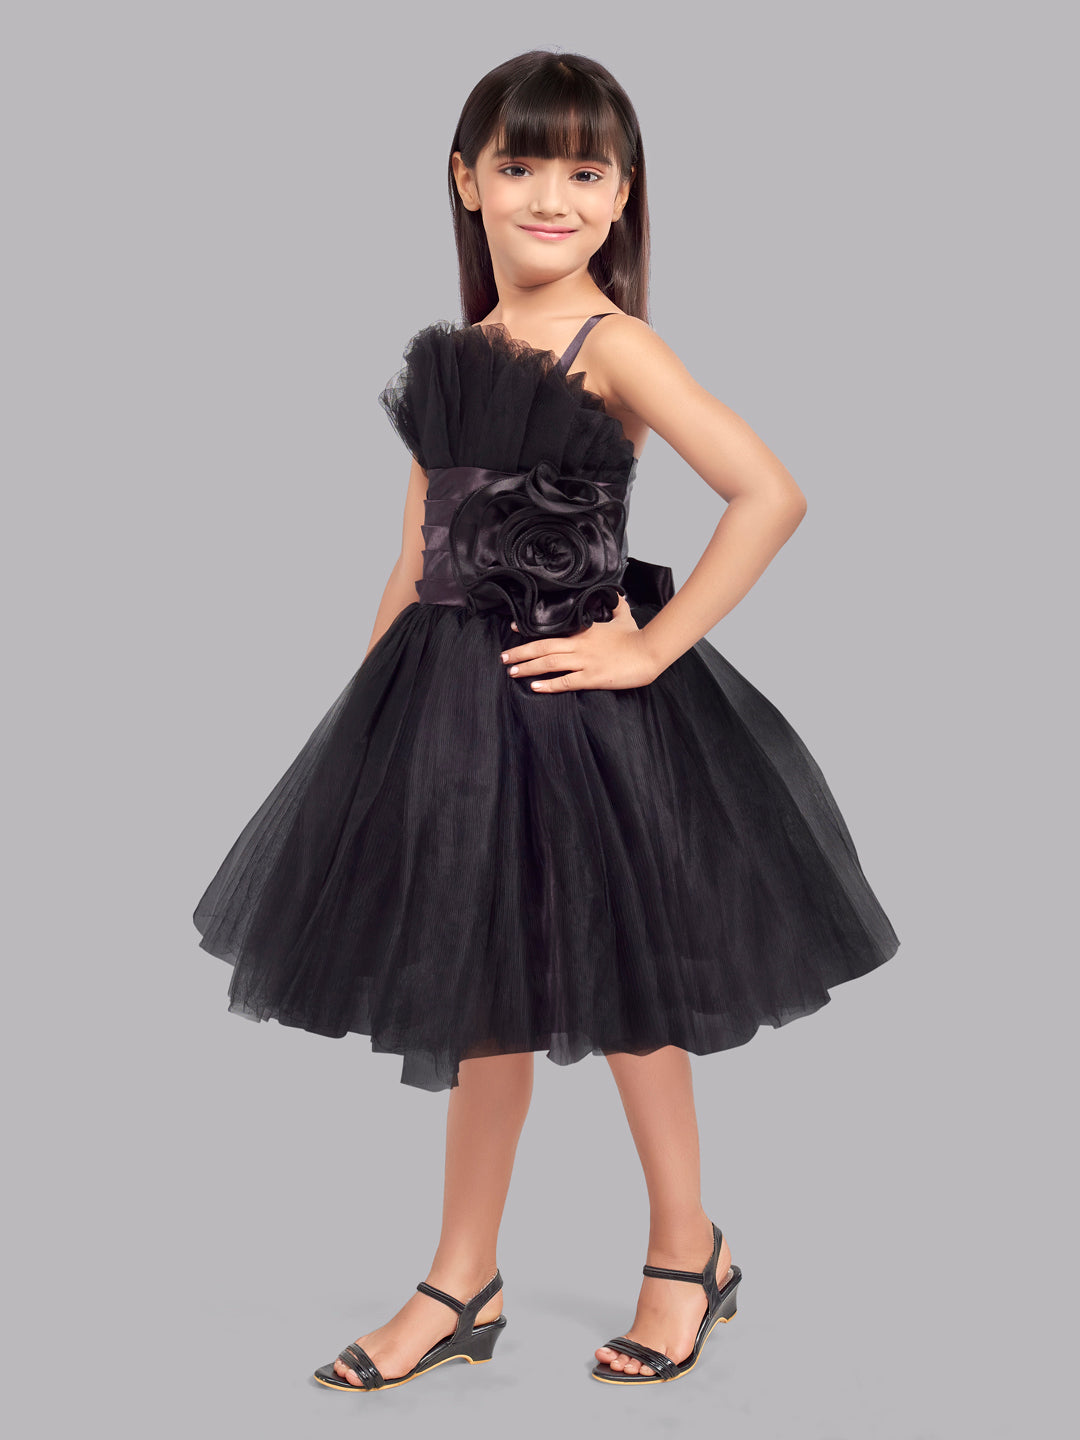 Ruffled Silhouette Party Dress -Black